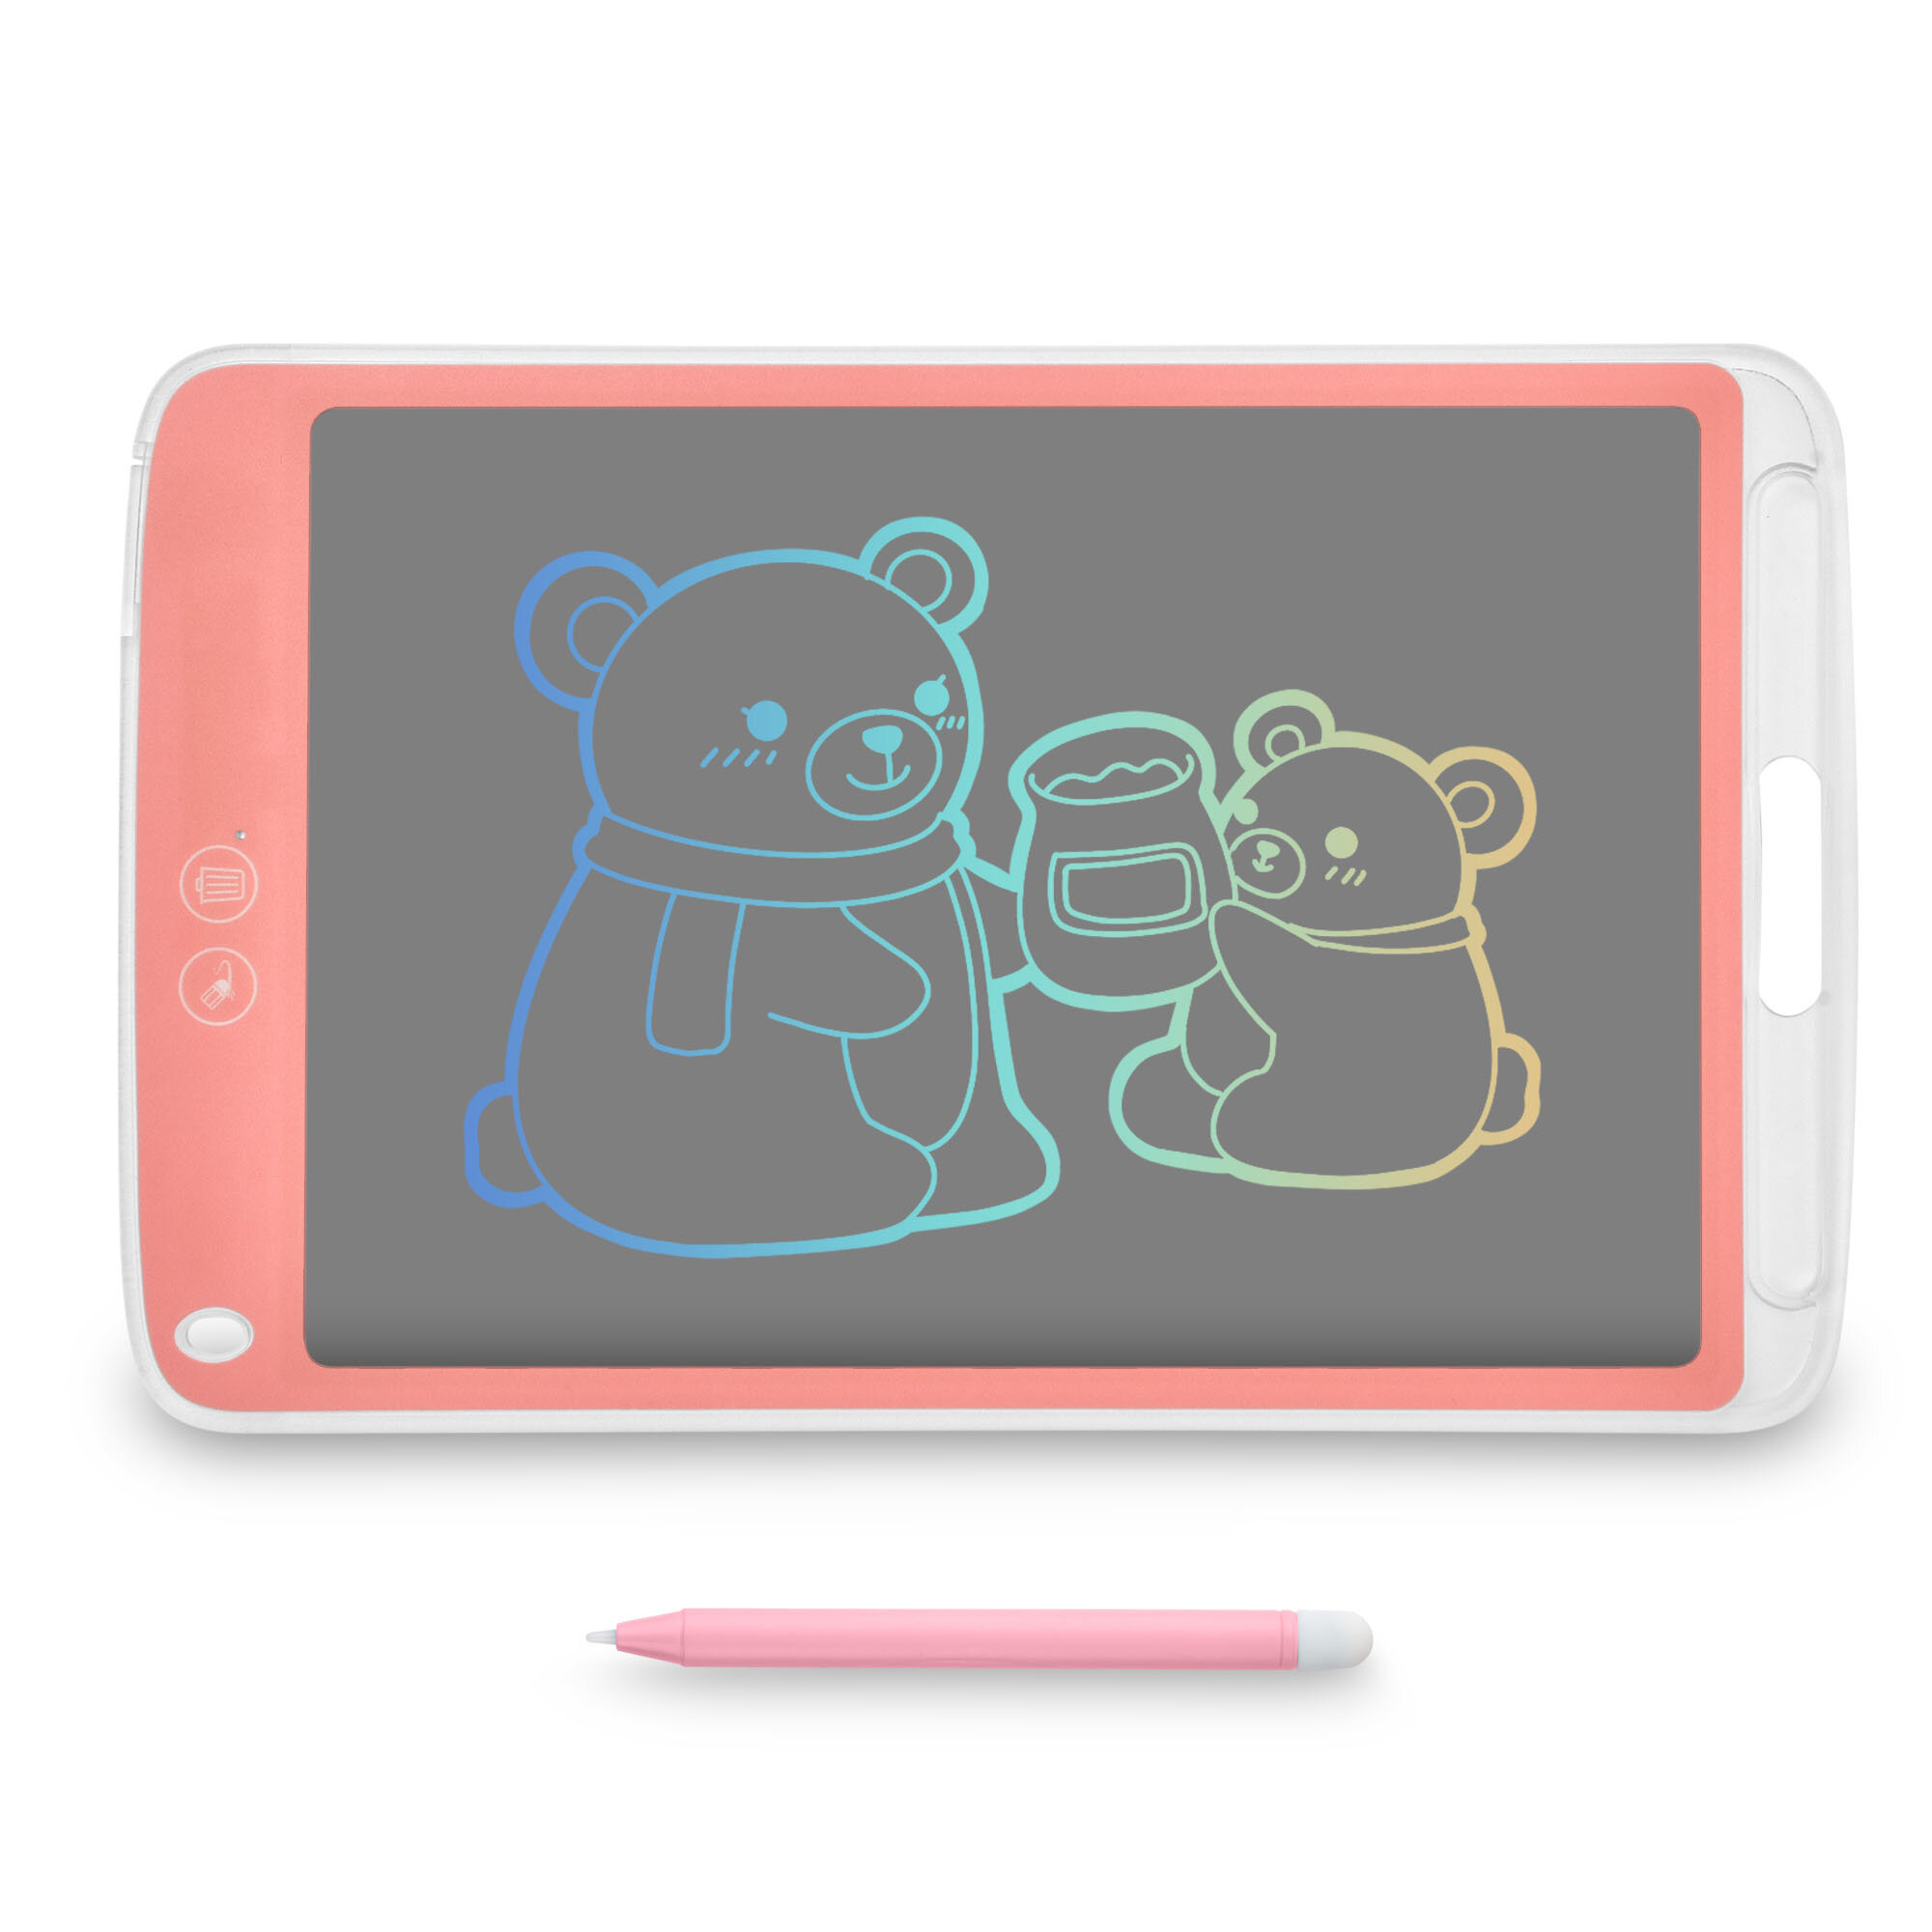 Green LCD Writing Tablet 10.5 inch Electronic Drawing Pads for Kids Portable Reusable Erasable Ewriter Elder Message Board Digital Handwriting Pad Doodle Board for School Fridge or Office 